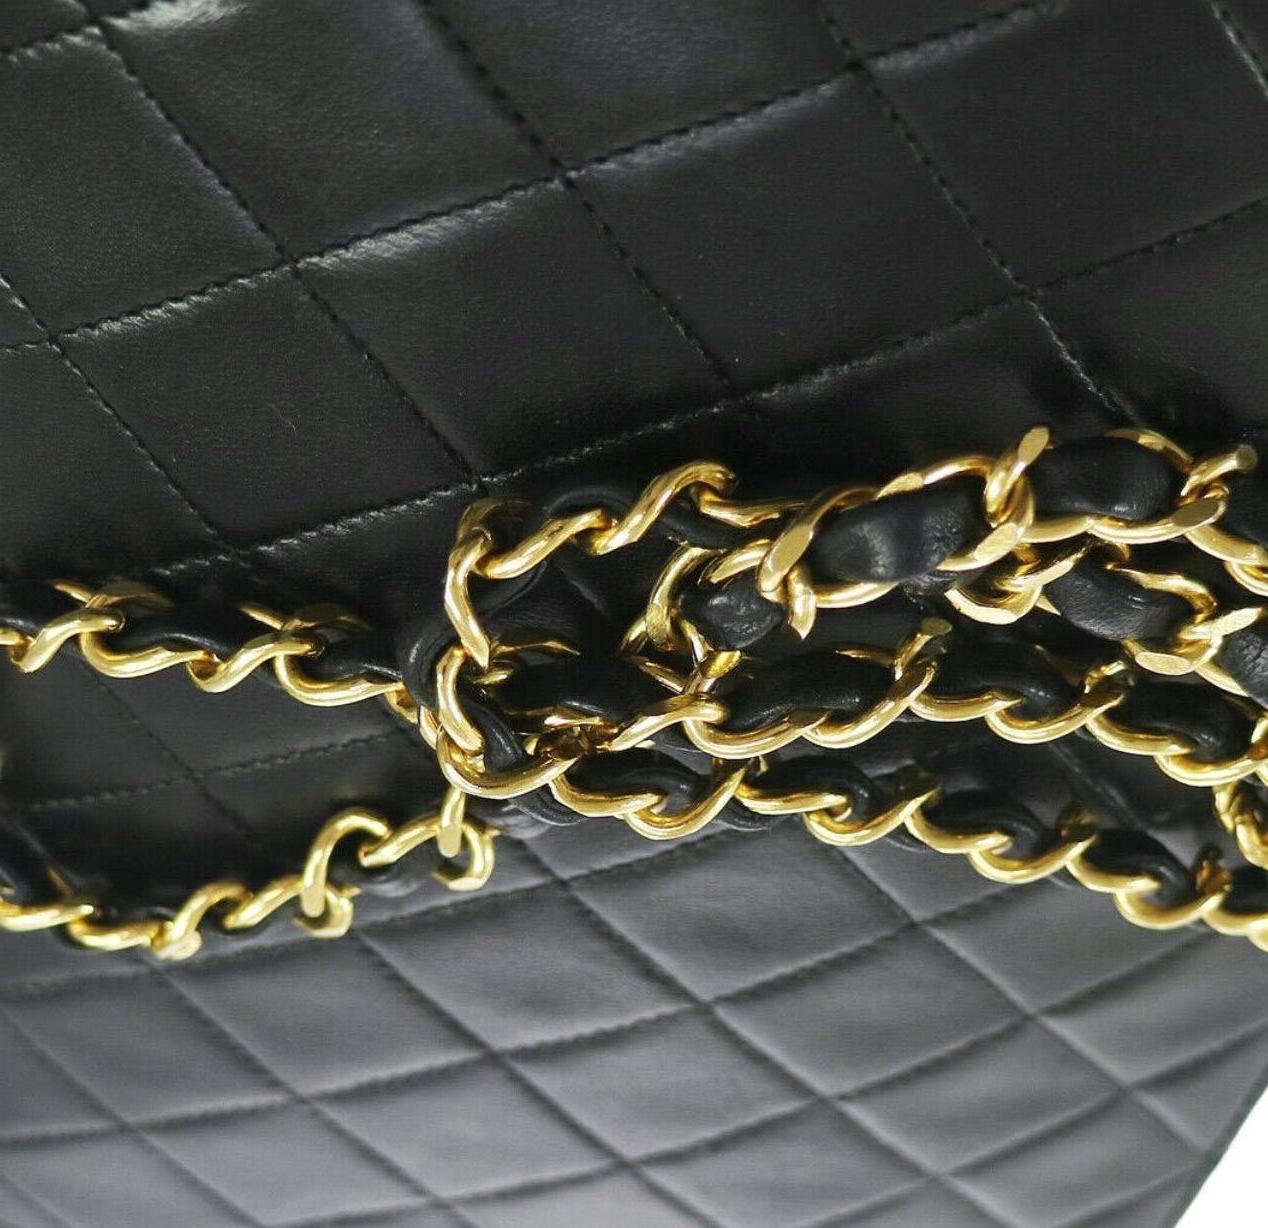 Leather
Gold tone hardware
Woven lining
Zipper closure
Made in France
Shoulder strap 17